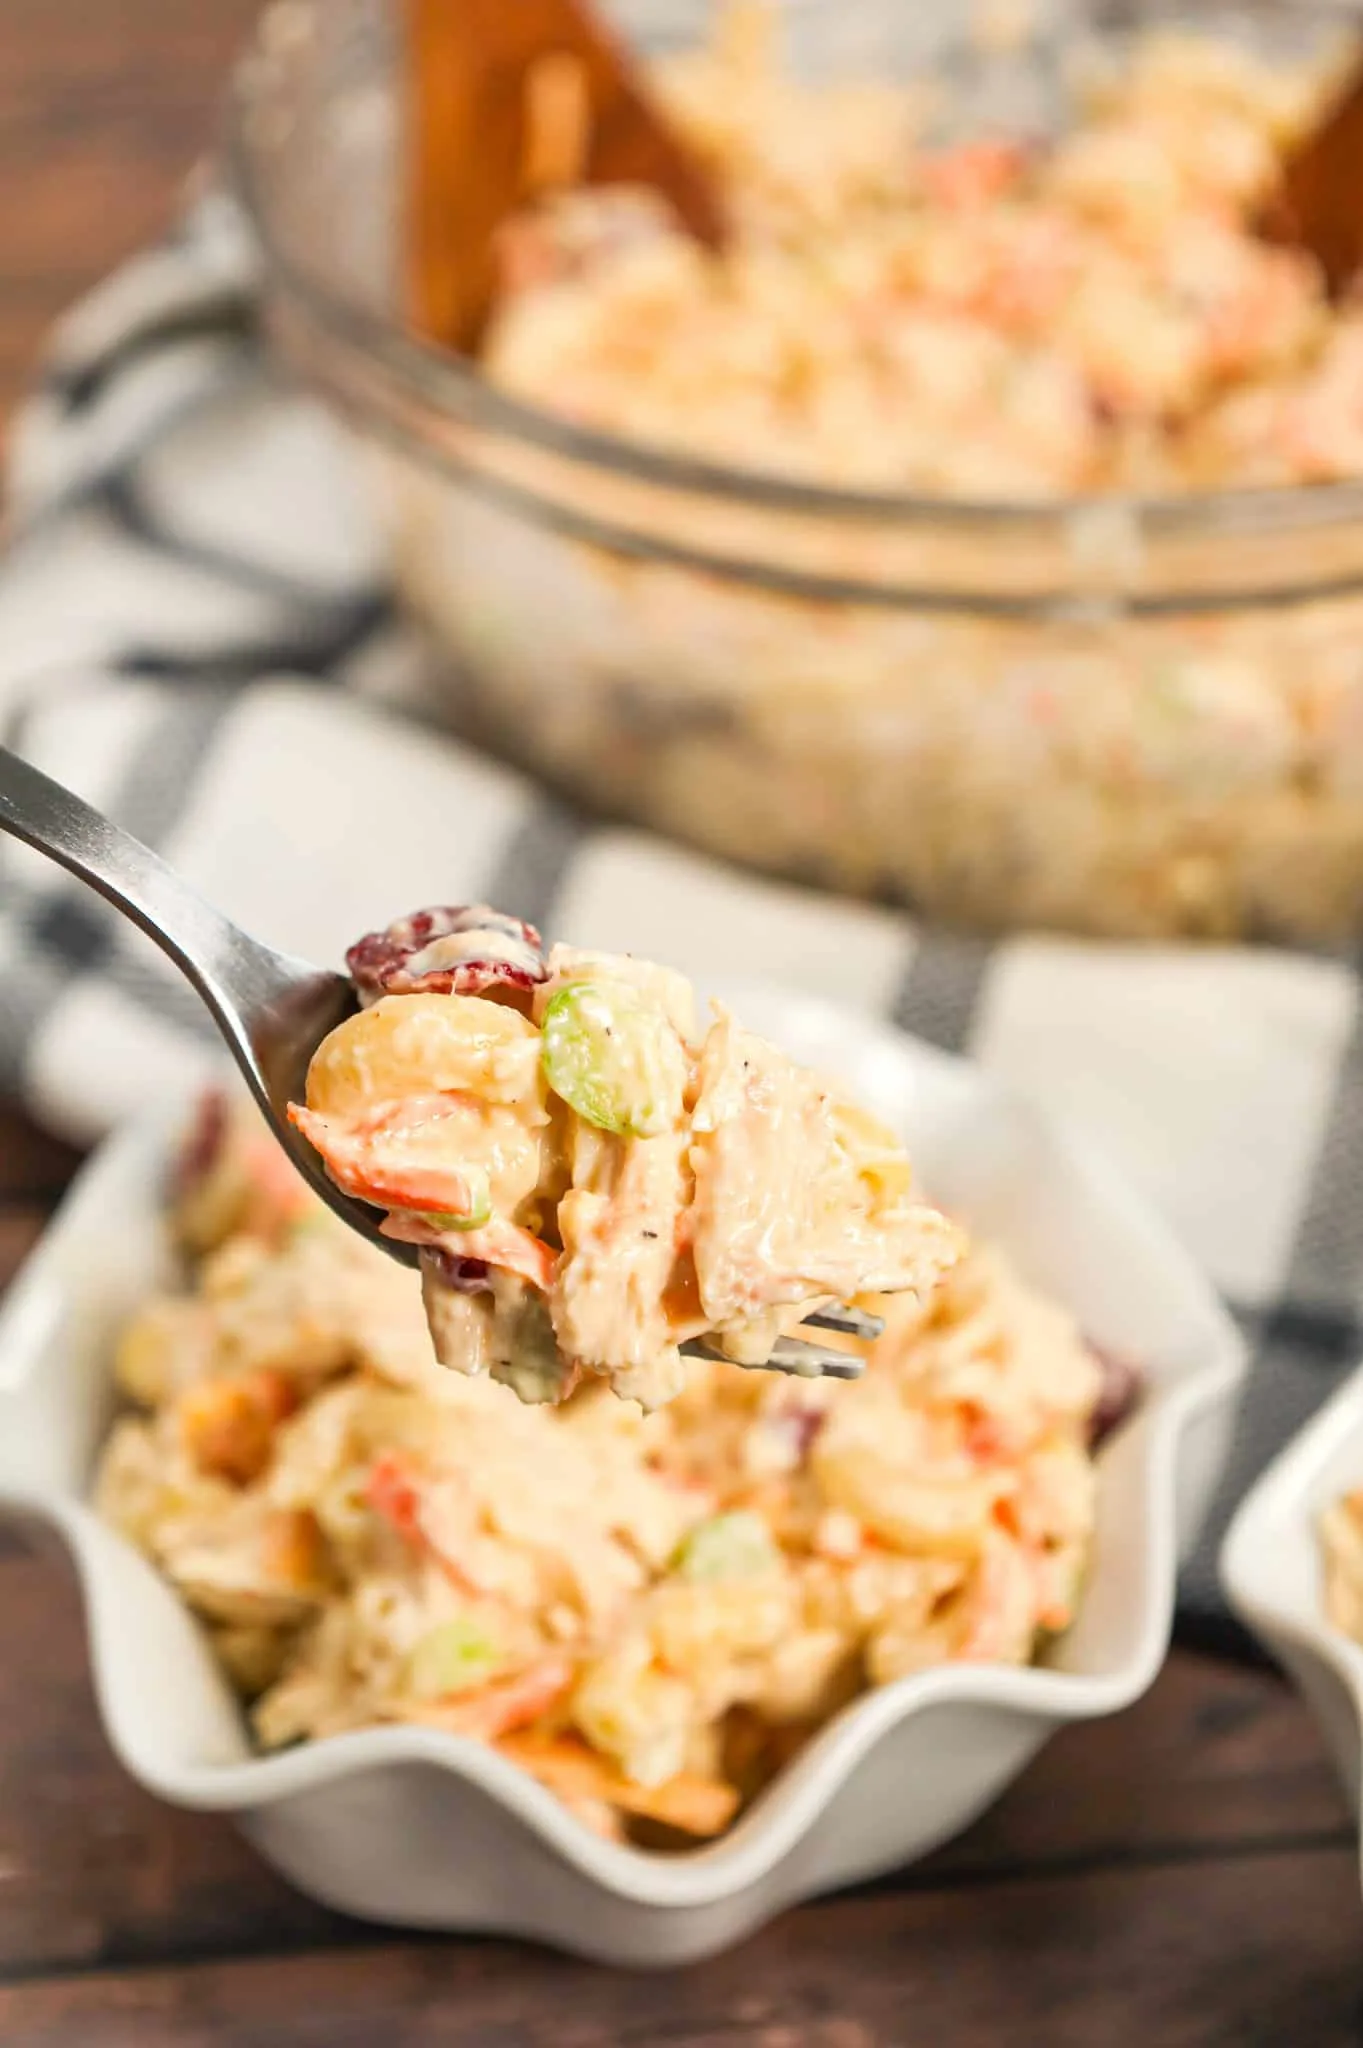 Chicken Macaroni Salad is a tasty pasta salad recipe loaded with carrots, onions, celery, mayo, chopped chicken, dried cranberries and shredded cheddar cheese.